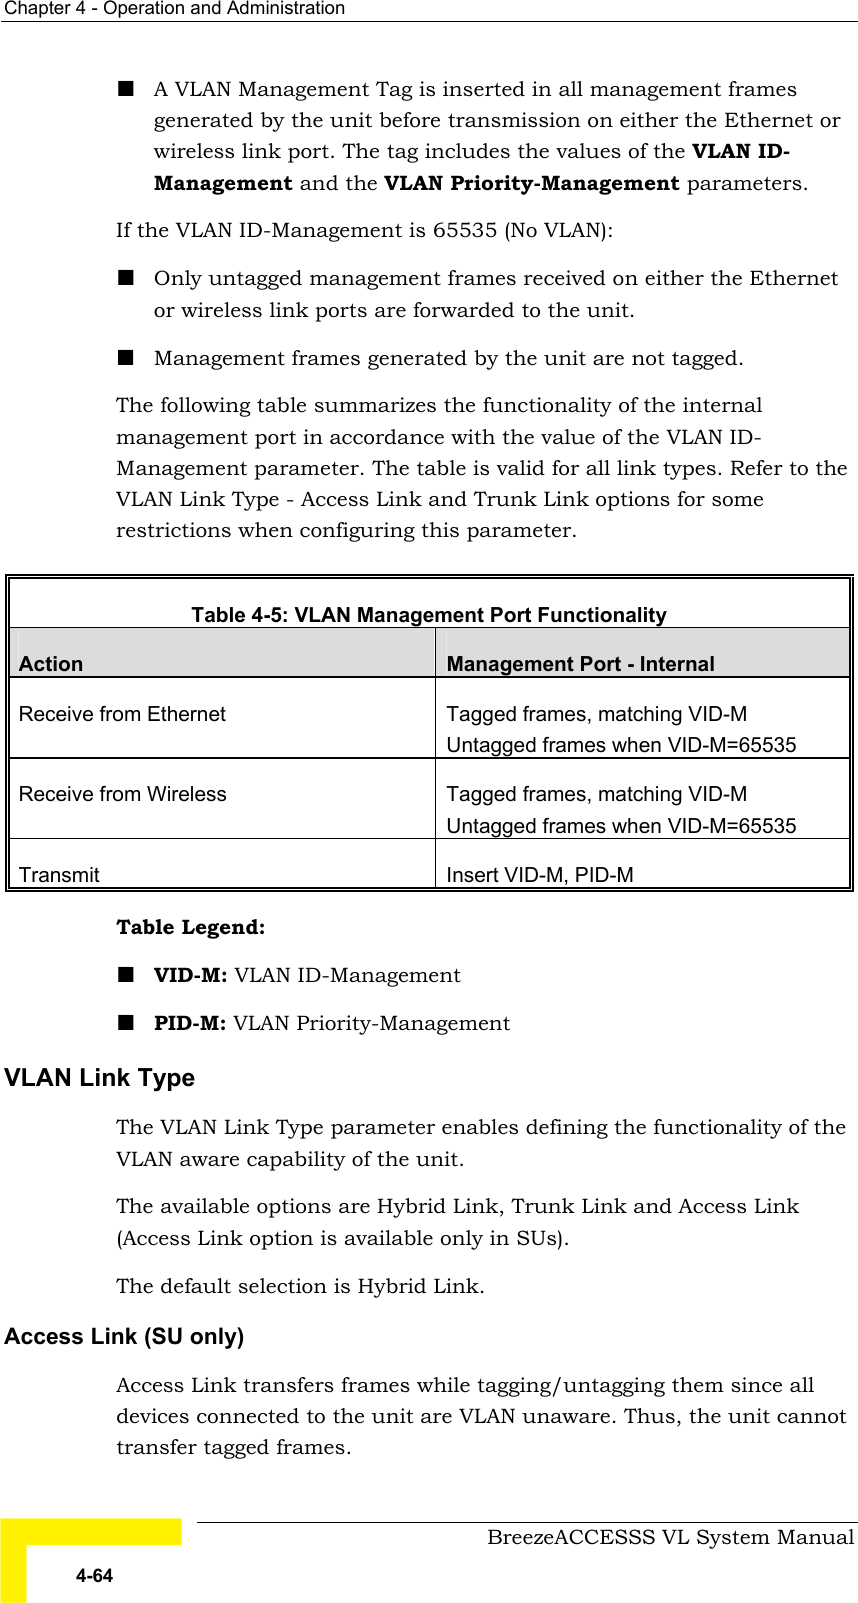 Chapter  4 - Operation and Administration     BreezeACCESSS VL System Manual 4-64 ! A VLAN Management Tag is inserted in all management frames generated by the unit before transmission on either the Ethernet or wireless link port. The tag includes the values of the VLAN ID- Management and the VLAN Priority-Management parameters. If the VLAN ID-Management is 65535 (No VLAN):  ! Only untagged management frames received on either the Ethernet or wireless link ports are forwarded to the unit.  ! Management frames generated by the unit are not tagged. The following table summarizes the functionality of the internal management port in accordance with the value of the VLAN ID-   Management parameter. The table is valid for all link types. Refer to the VLAN Link Type - Access Link and Trunk Link options for some restrictions when configuring this parameter.  Table   4-5: VLAN Management Port Functionality Action  Management Port - Internal Receive from Ethernet   Tagged frames, matching VID-M Untagged frames when VID-M=65535 Receive from Wireless  Tagged frames, matching VID-M Untagged frames when VID-M=65535 Transmit  Insert VID-M, PID-M Table Legend:  ! VID-M: VLAN ID-Management  ! PID-M: VLAN Priority-Management VLAN Link Type  The VLAN Link Type parameter enables defining the functionality of the VLAN aware capability of the unit.  The available options are Hybrid Link, Trunk Link and Access Link (Access Link option is available only in SUs).  The default selection is Hybrid Link. Access Link (SU only) Access Link transfers frames while tagging/untagging them since all devices connected to the unit are VLAN unaware. Thus, the unit cannot transfer tagged frames. 